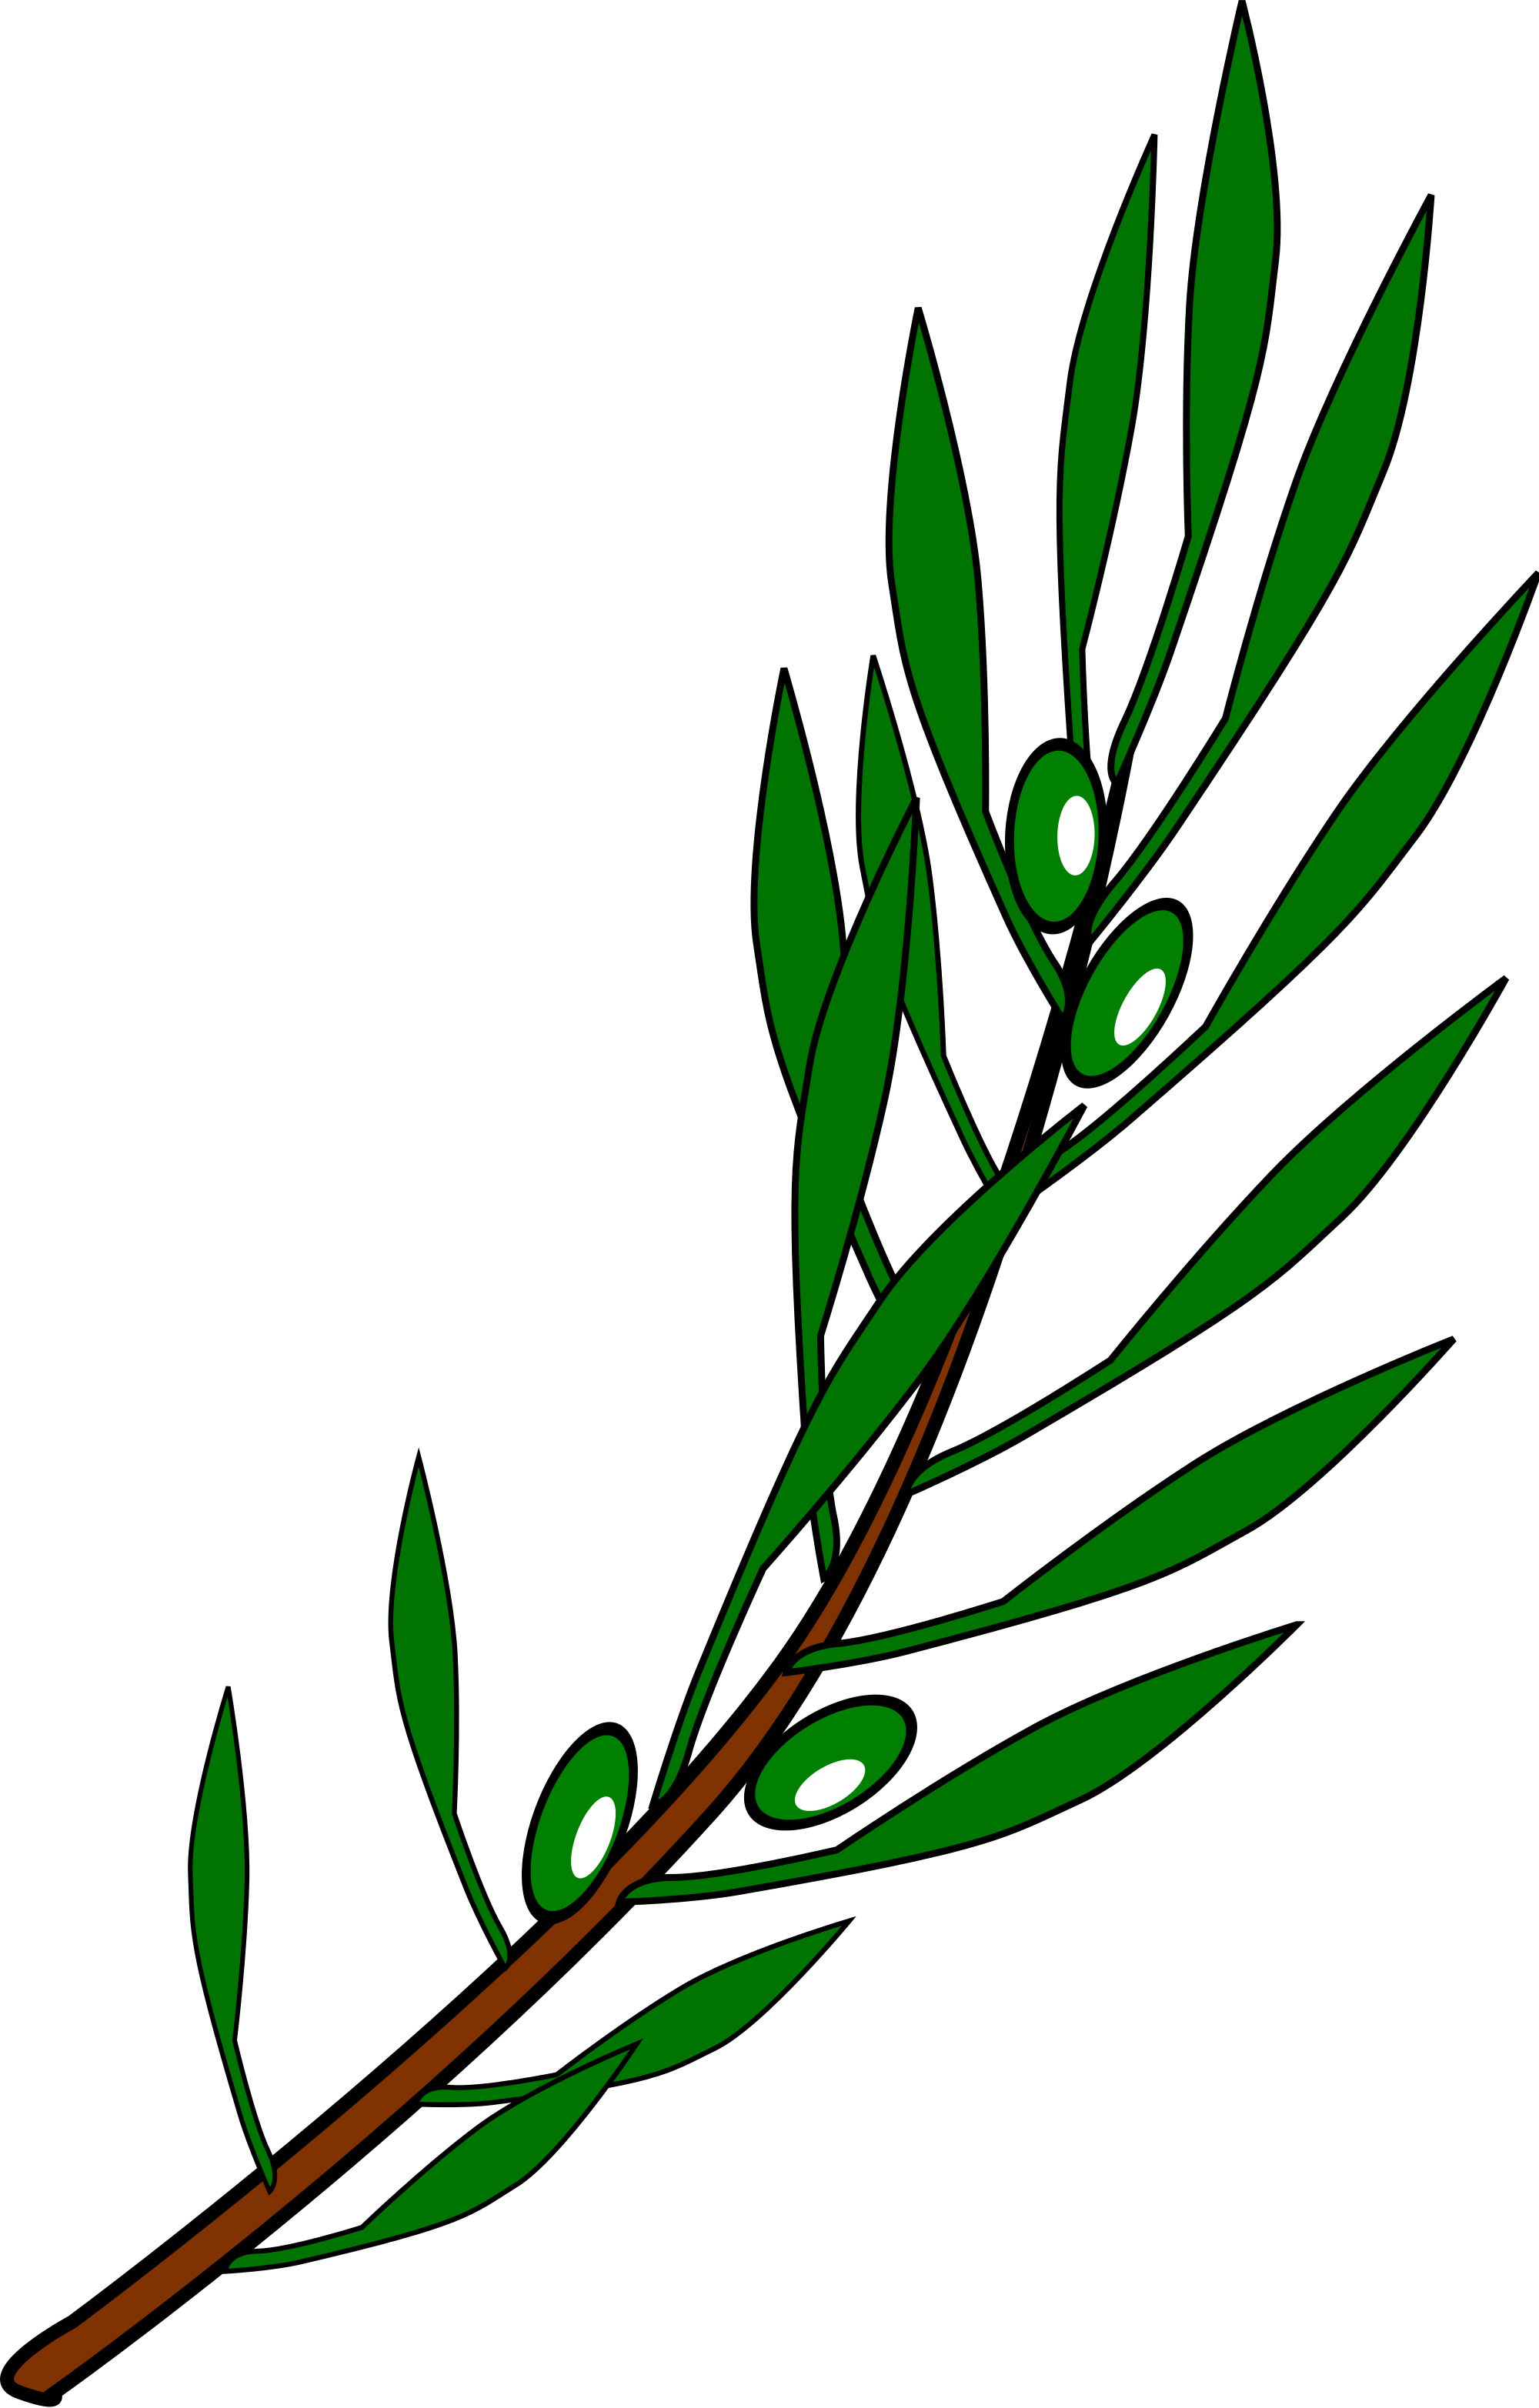 File:Olive branch drawing - Wikimedia Commons